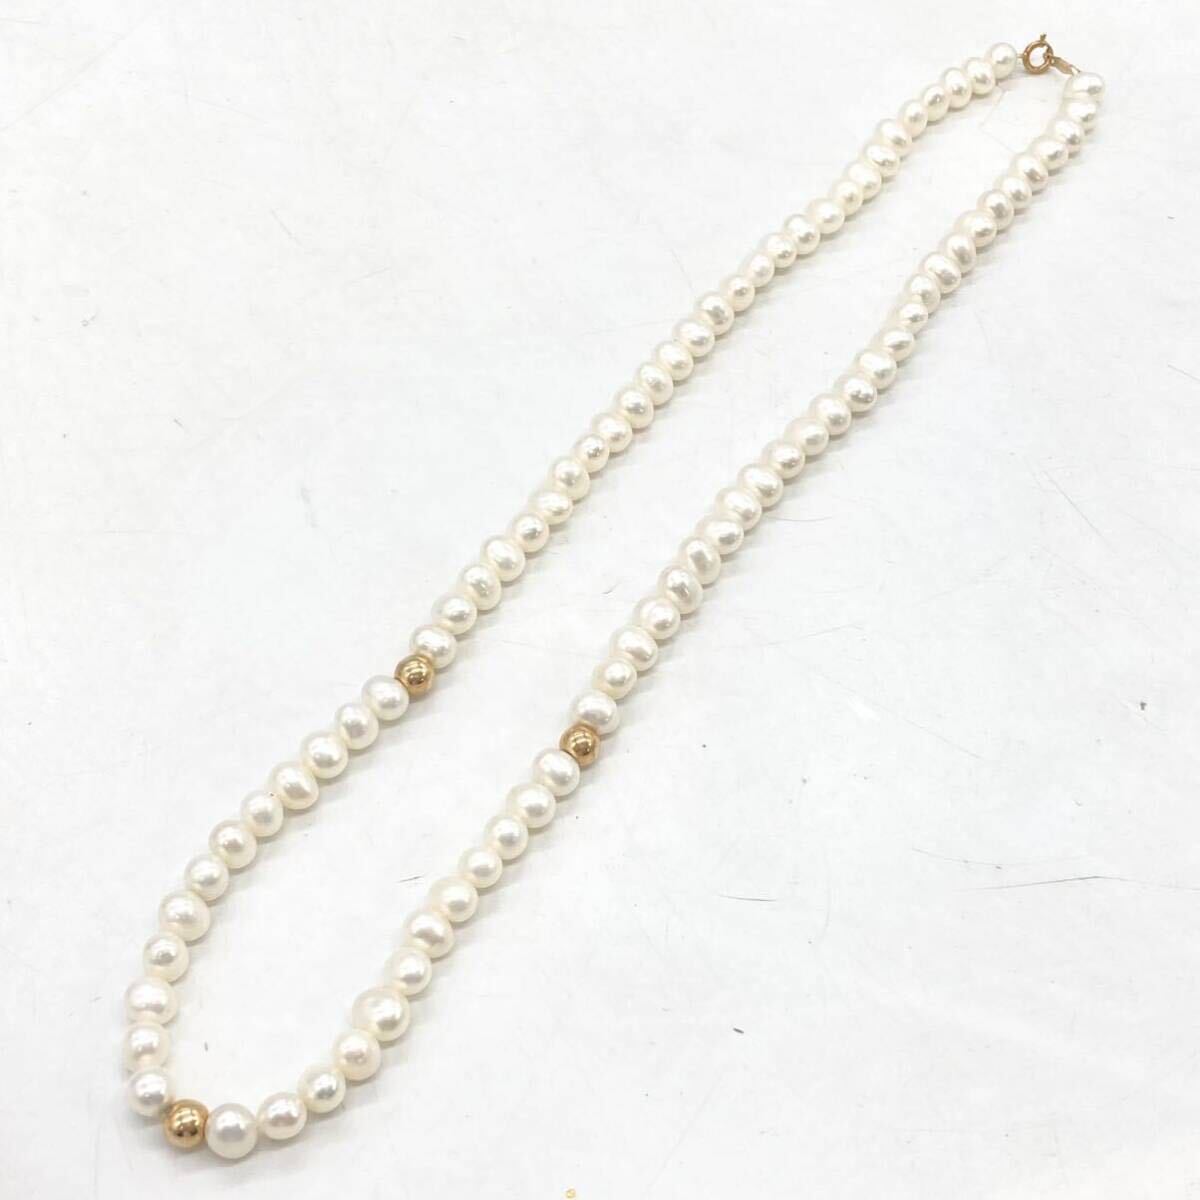 ■K14本真珠ネックレス■a約19.5g 真珠 淡水 ベビー pearl Pearl ネックレス necklace jewelry ジュエリー シルバー silver DB5の画像3